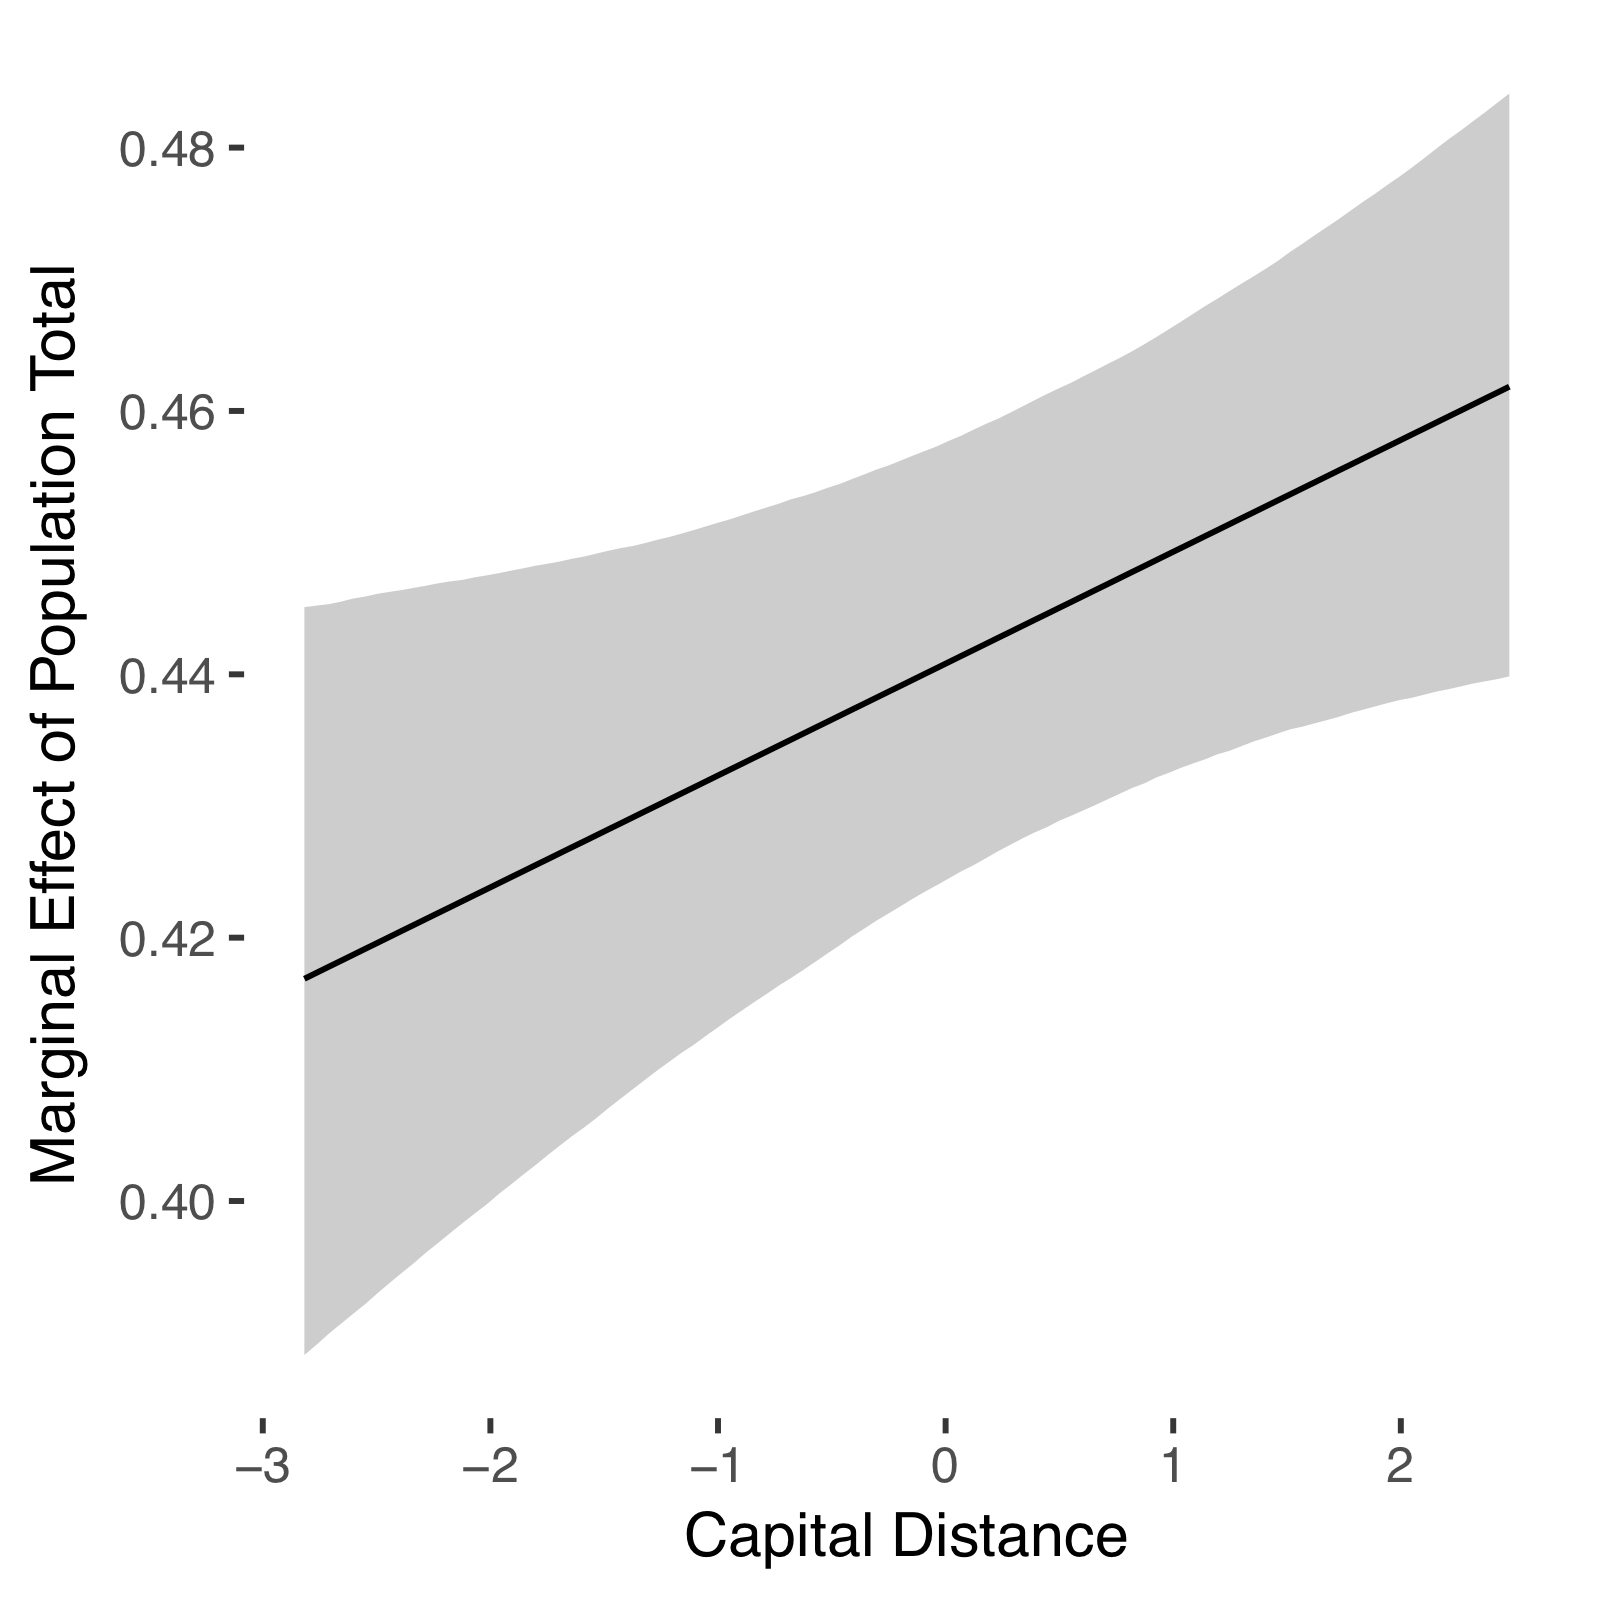 marginal effects plot generated by BayesPostEst